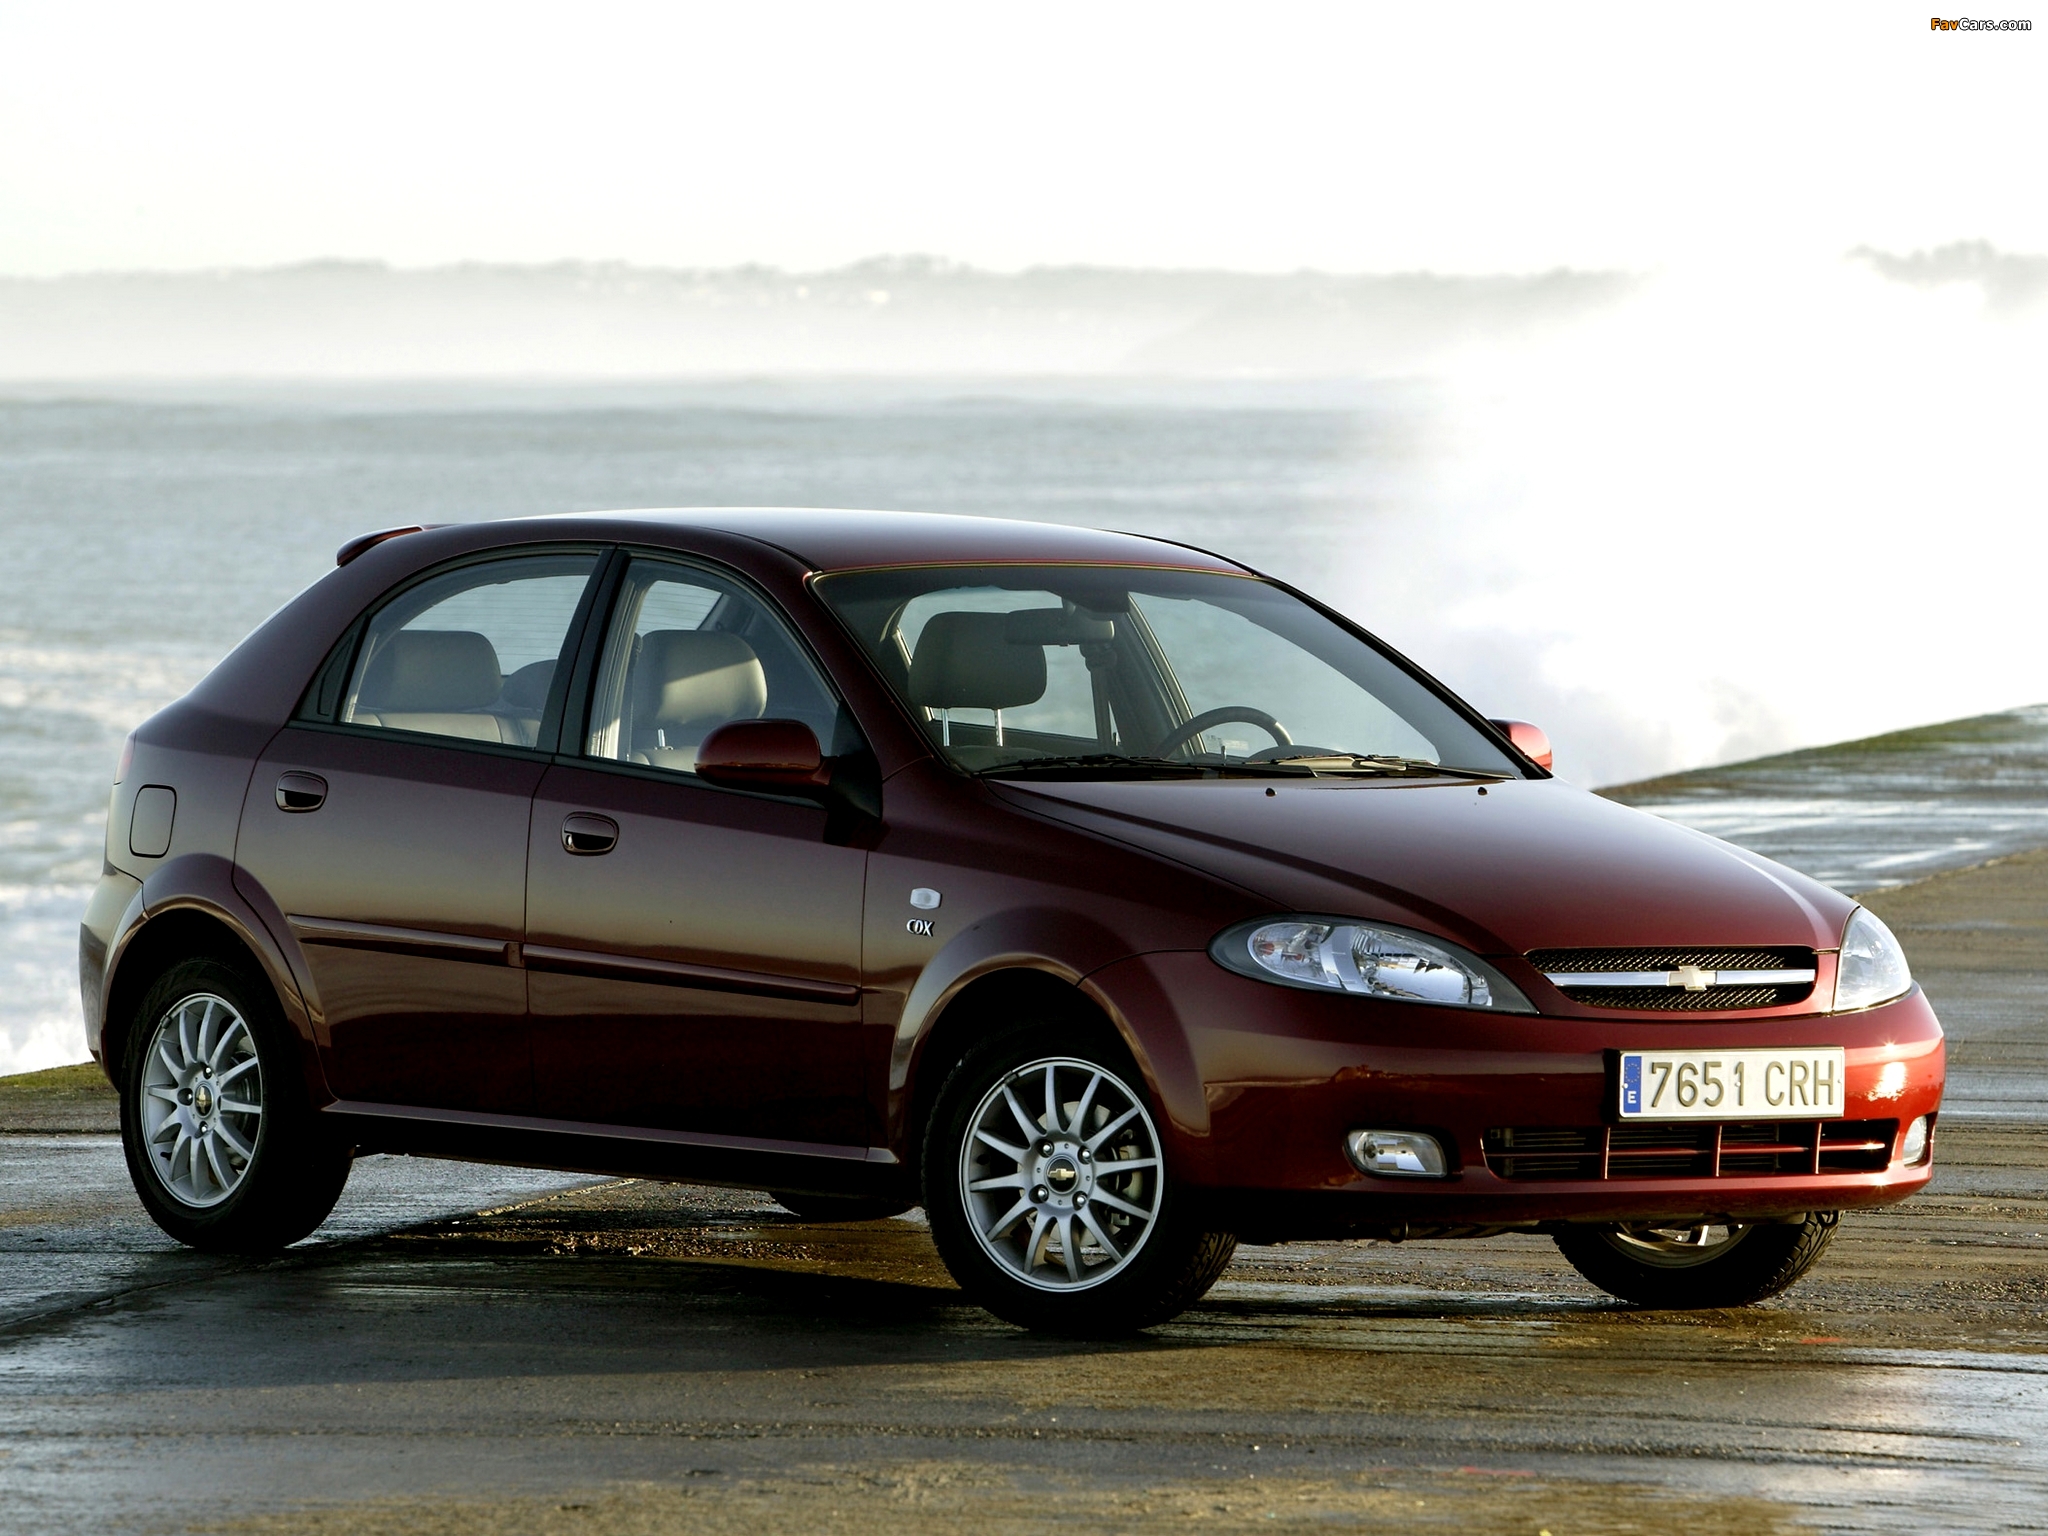 Chevrolet Lacetti Hatchback 2004 pictures (2048 x 1536)